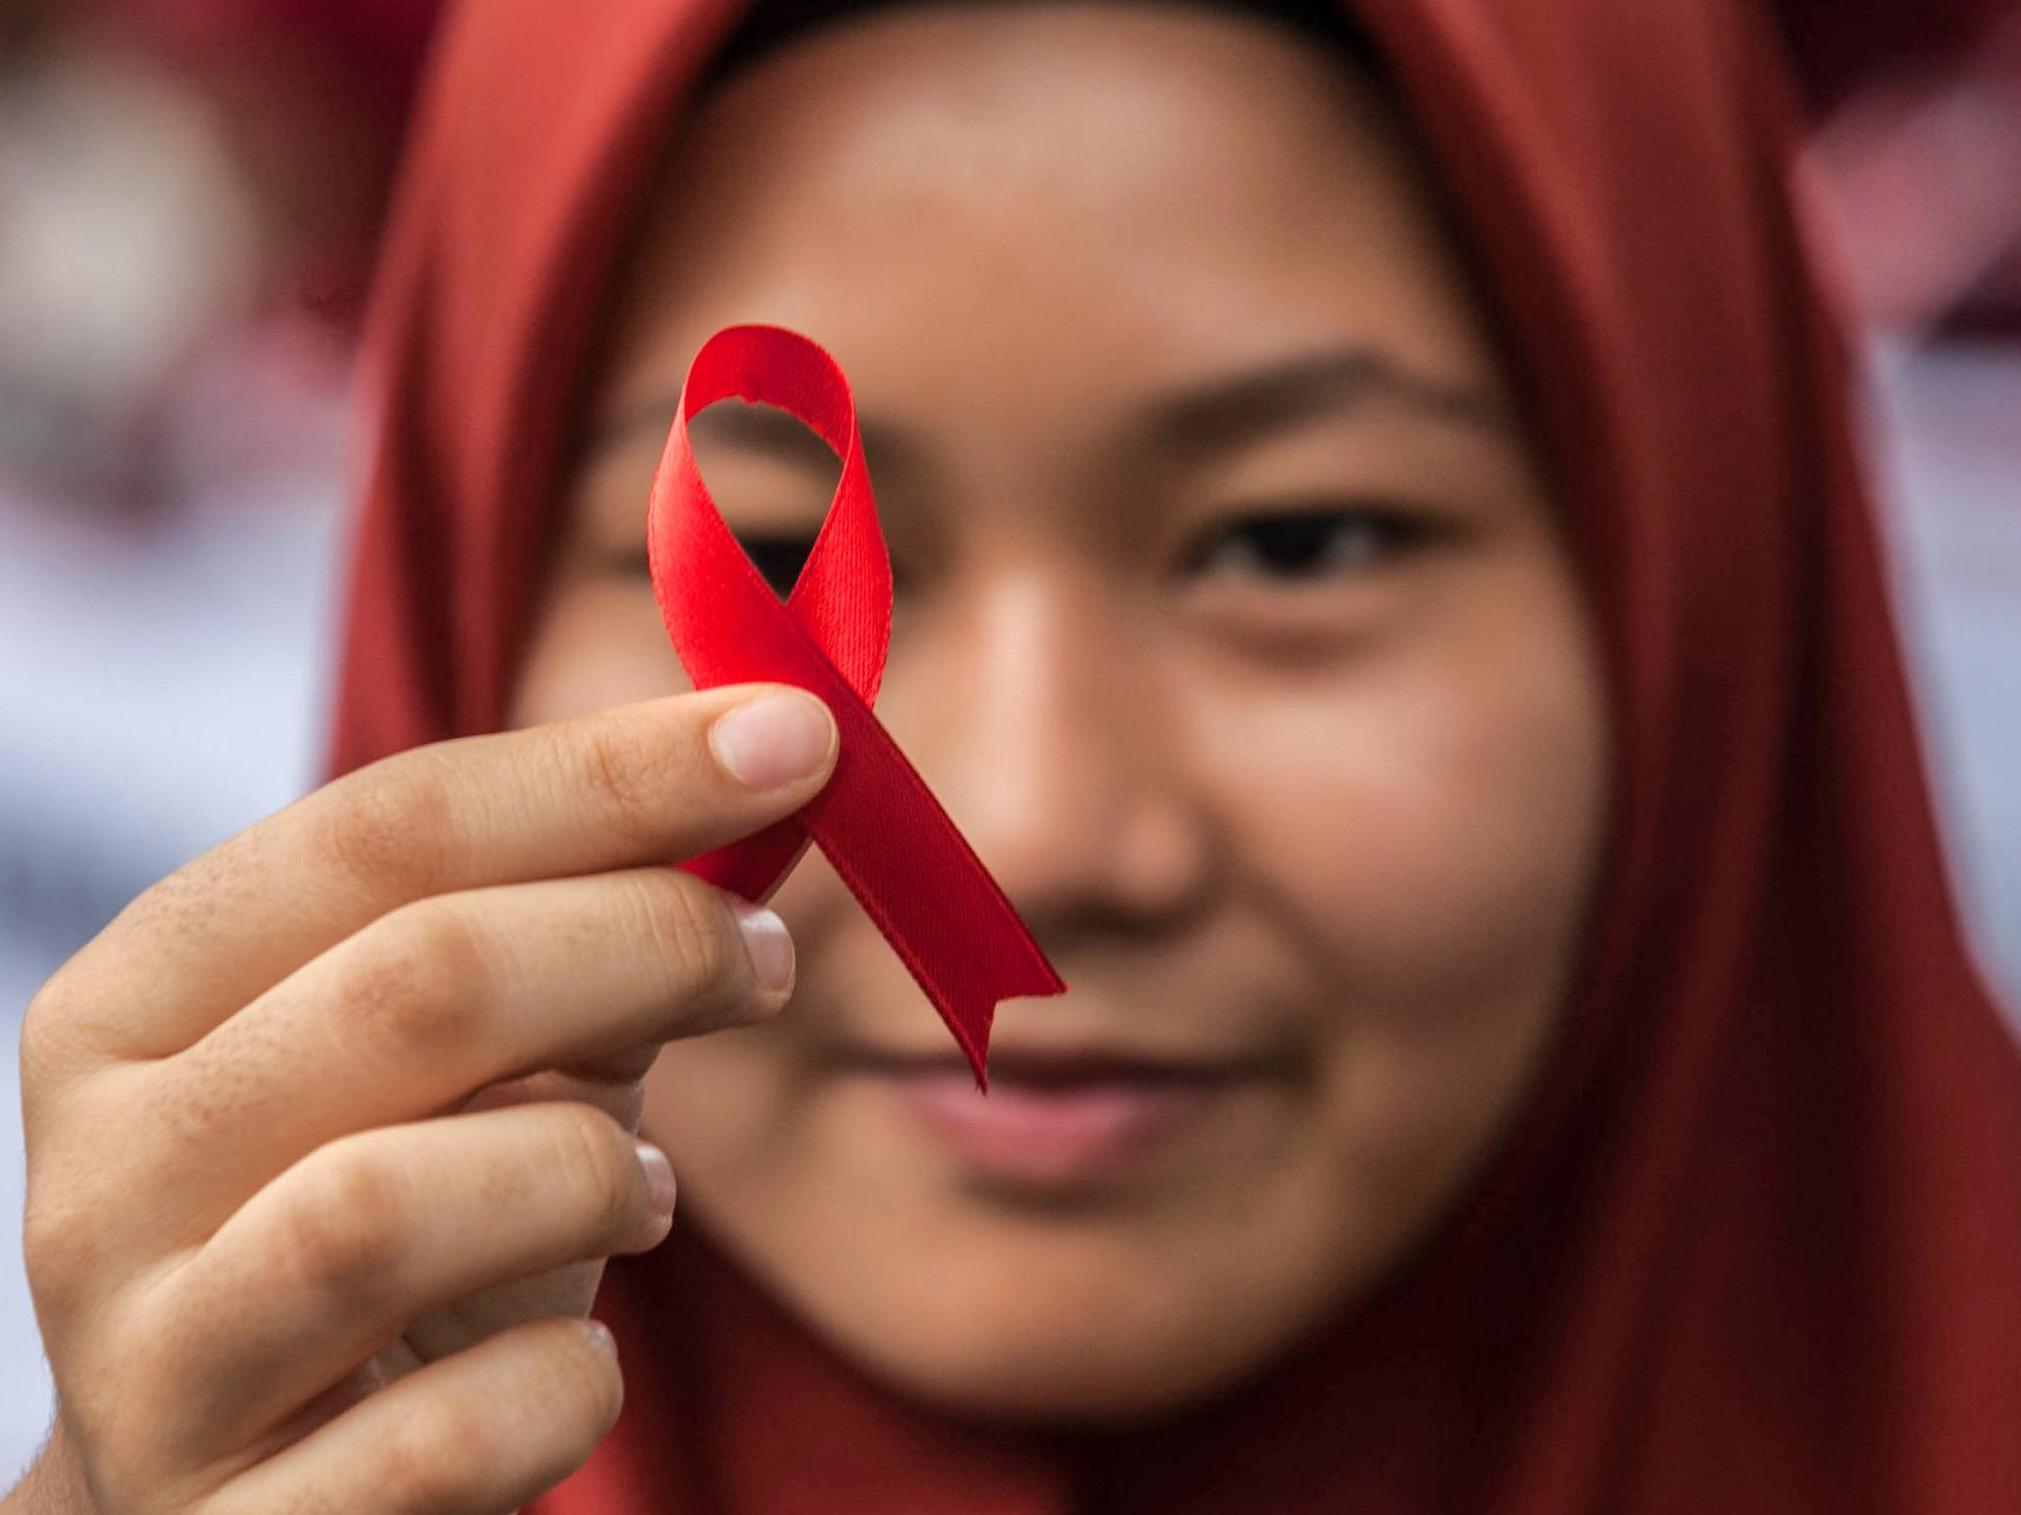 An Indonesian student holds a red ribbon as part of an HIV awareness event in Sumatra